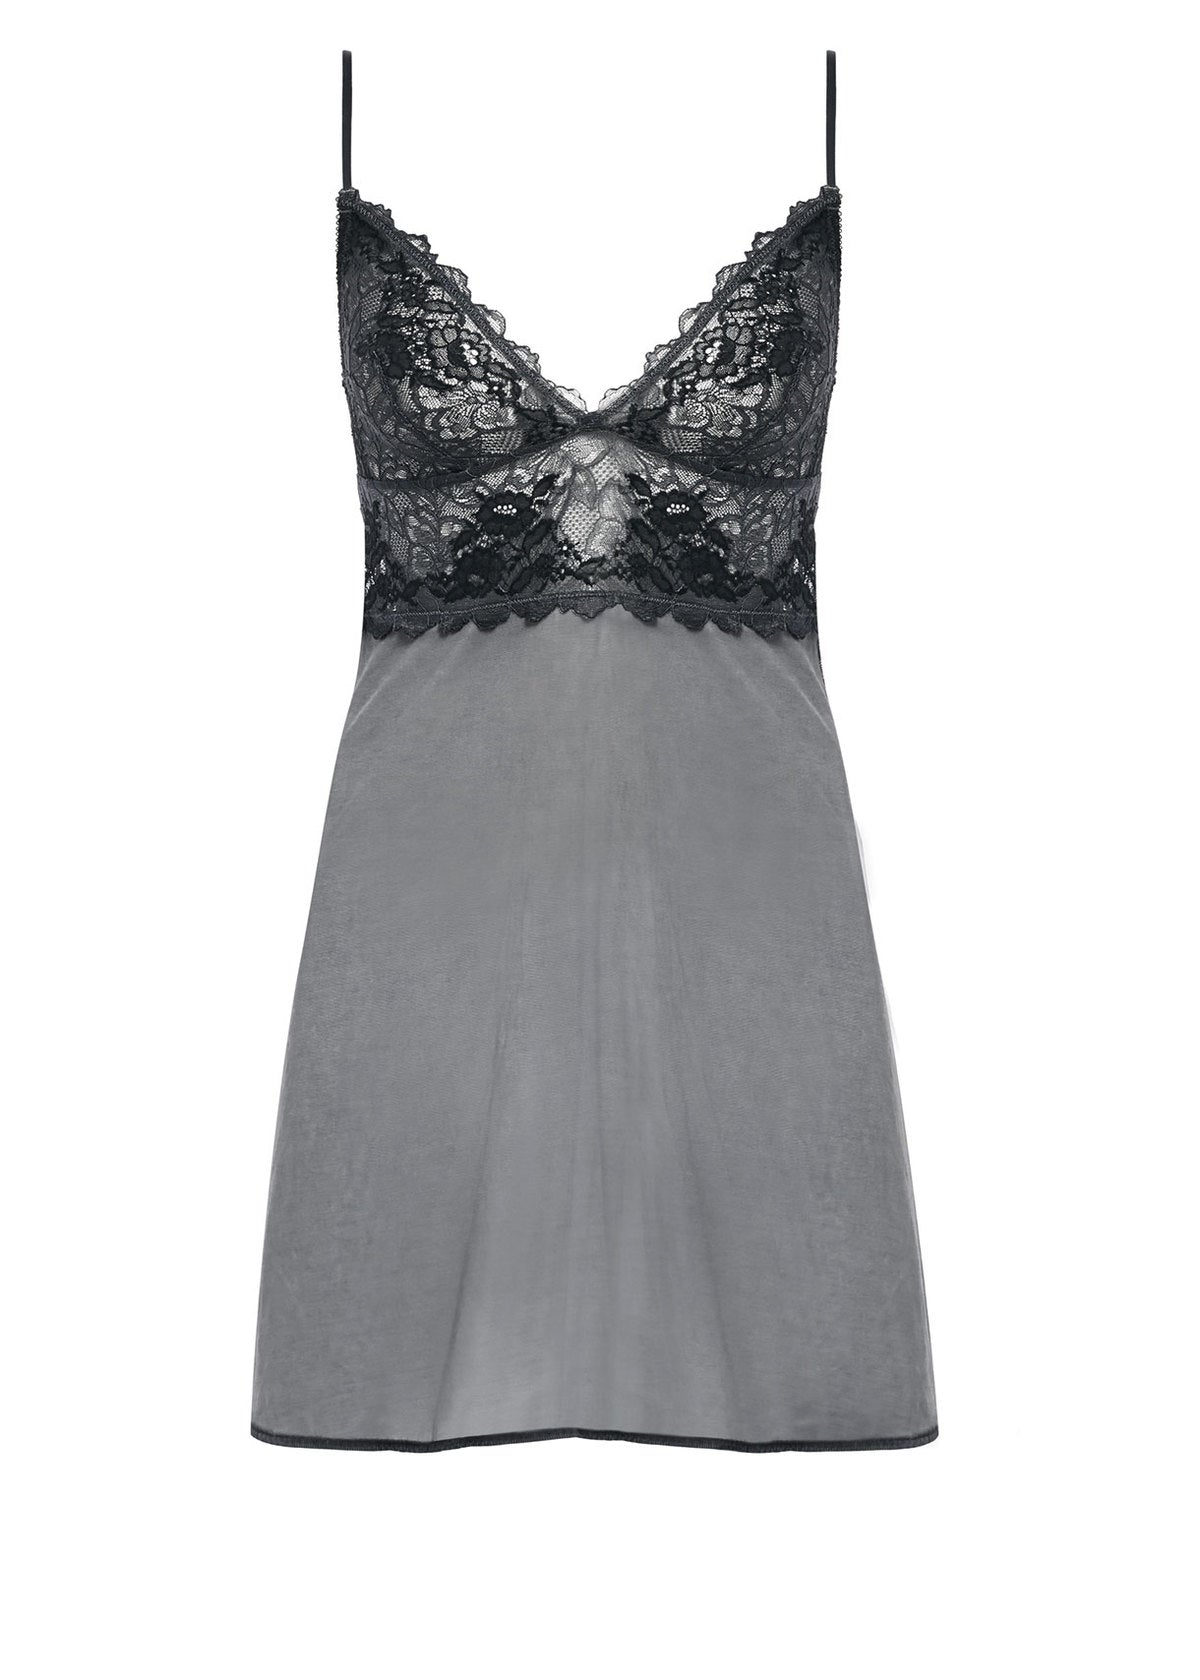 Lace Perfection Chemise